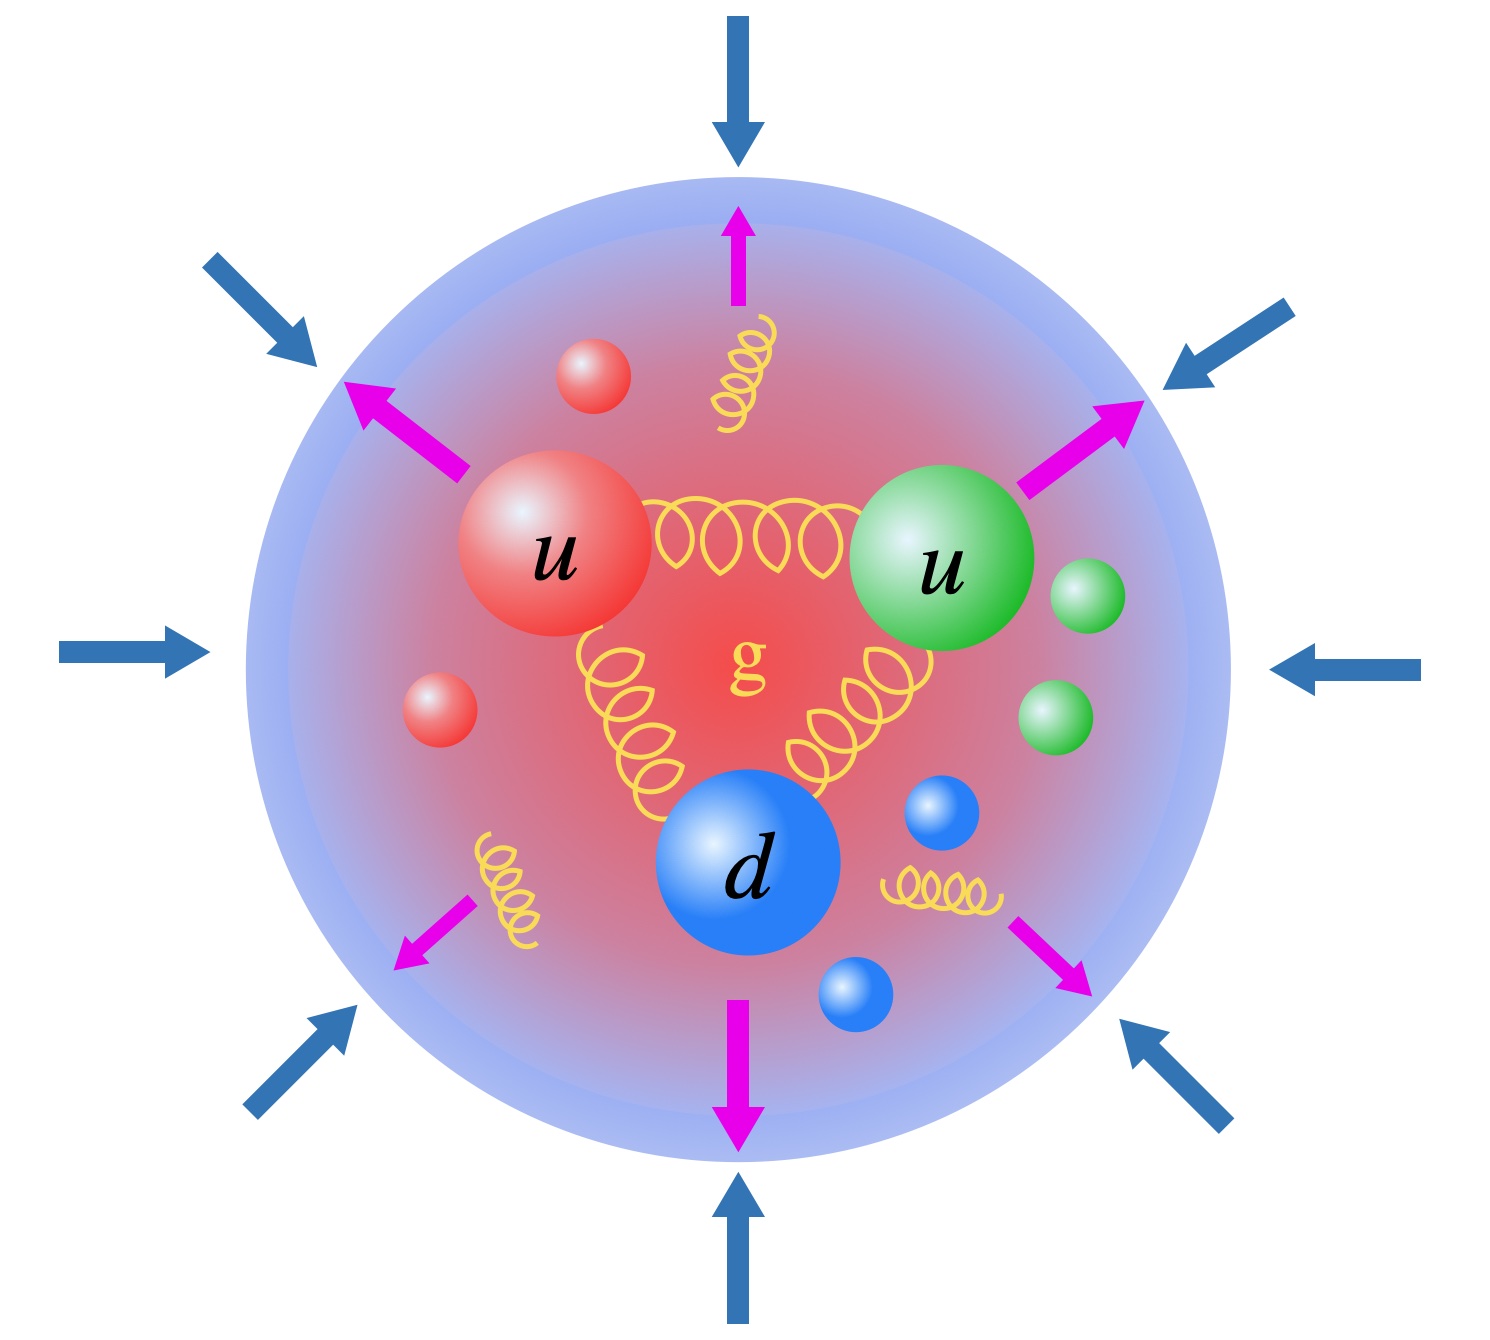 A depiction of how equilibrium is maintained in hadrons. Pressure from quarks and gluons (outward-pointing purple arrows) balances against pressure from trace anomaly and sigma terms (inward-pointing blue arrows).